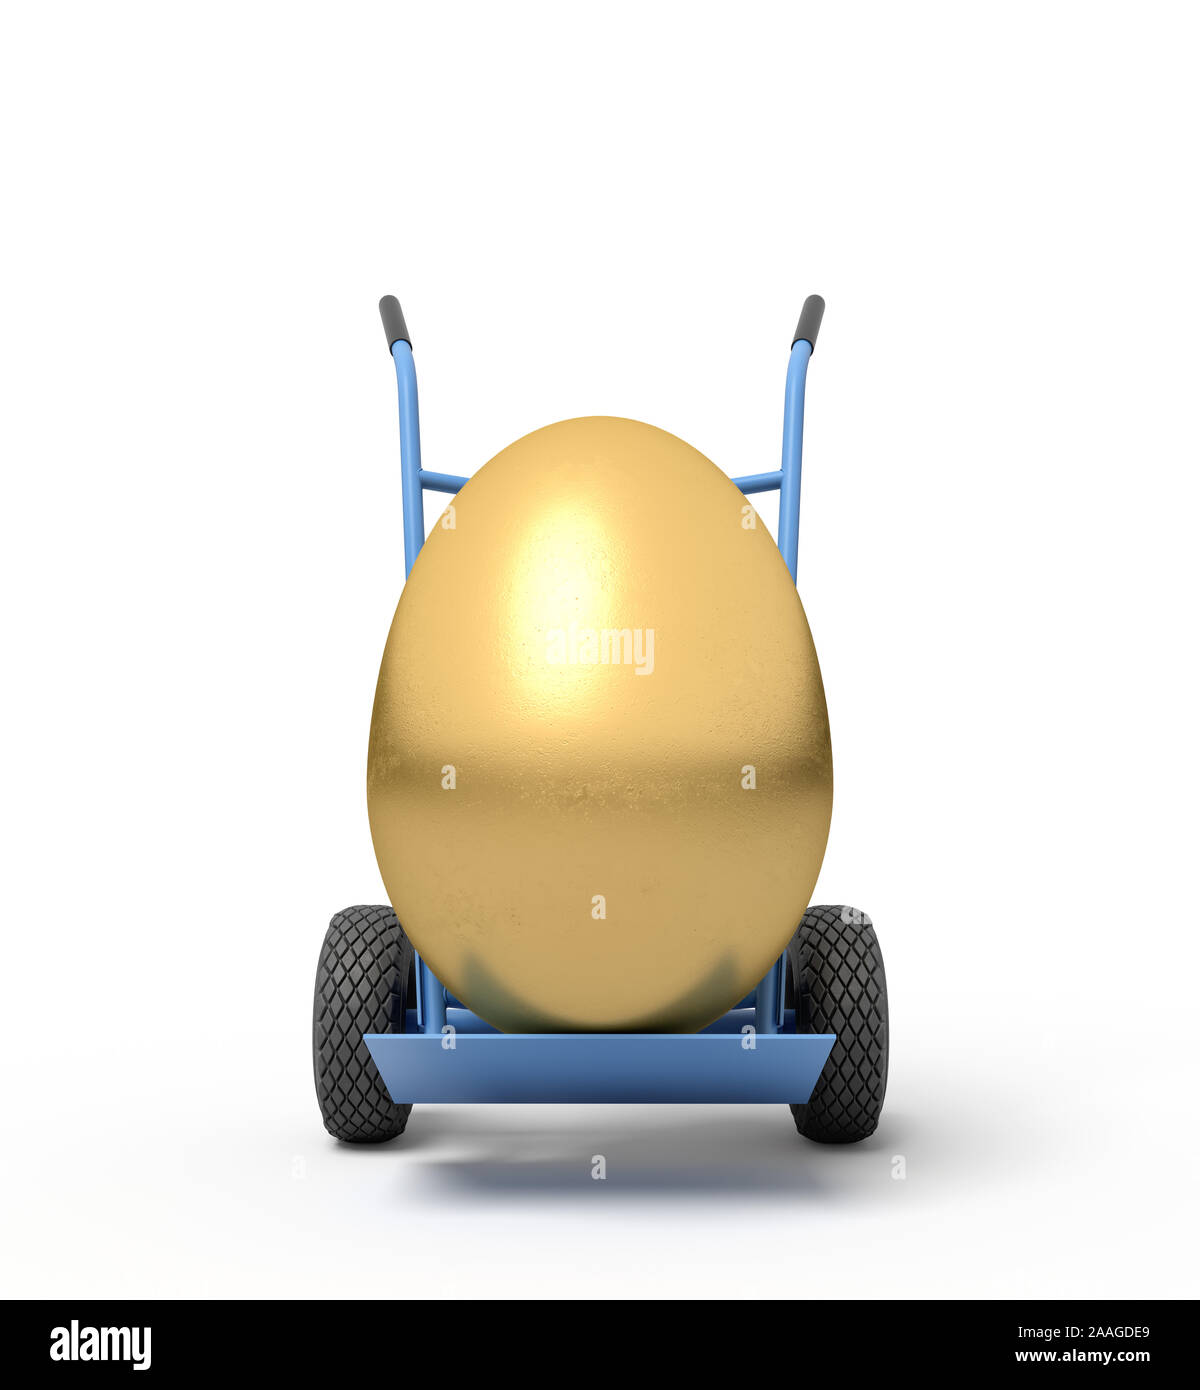 3d rendering of a golden egg on a hand truck. Business and finance. Banking and financial industry. Management and savings. Stock Photo